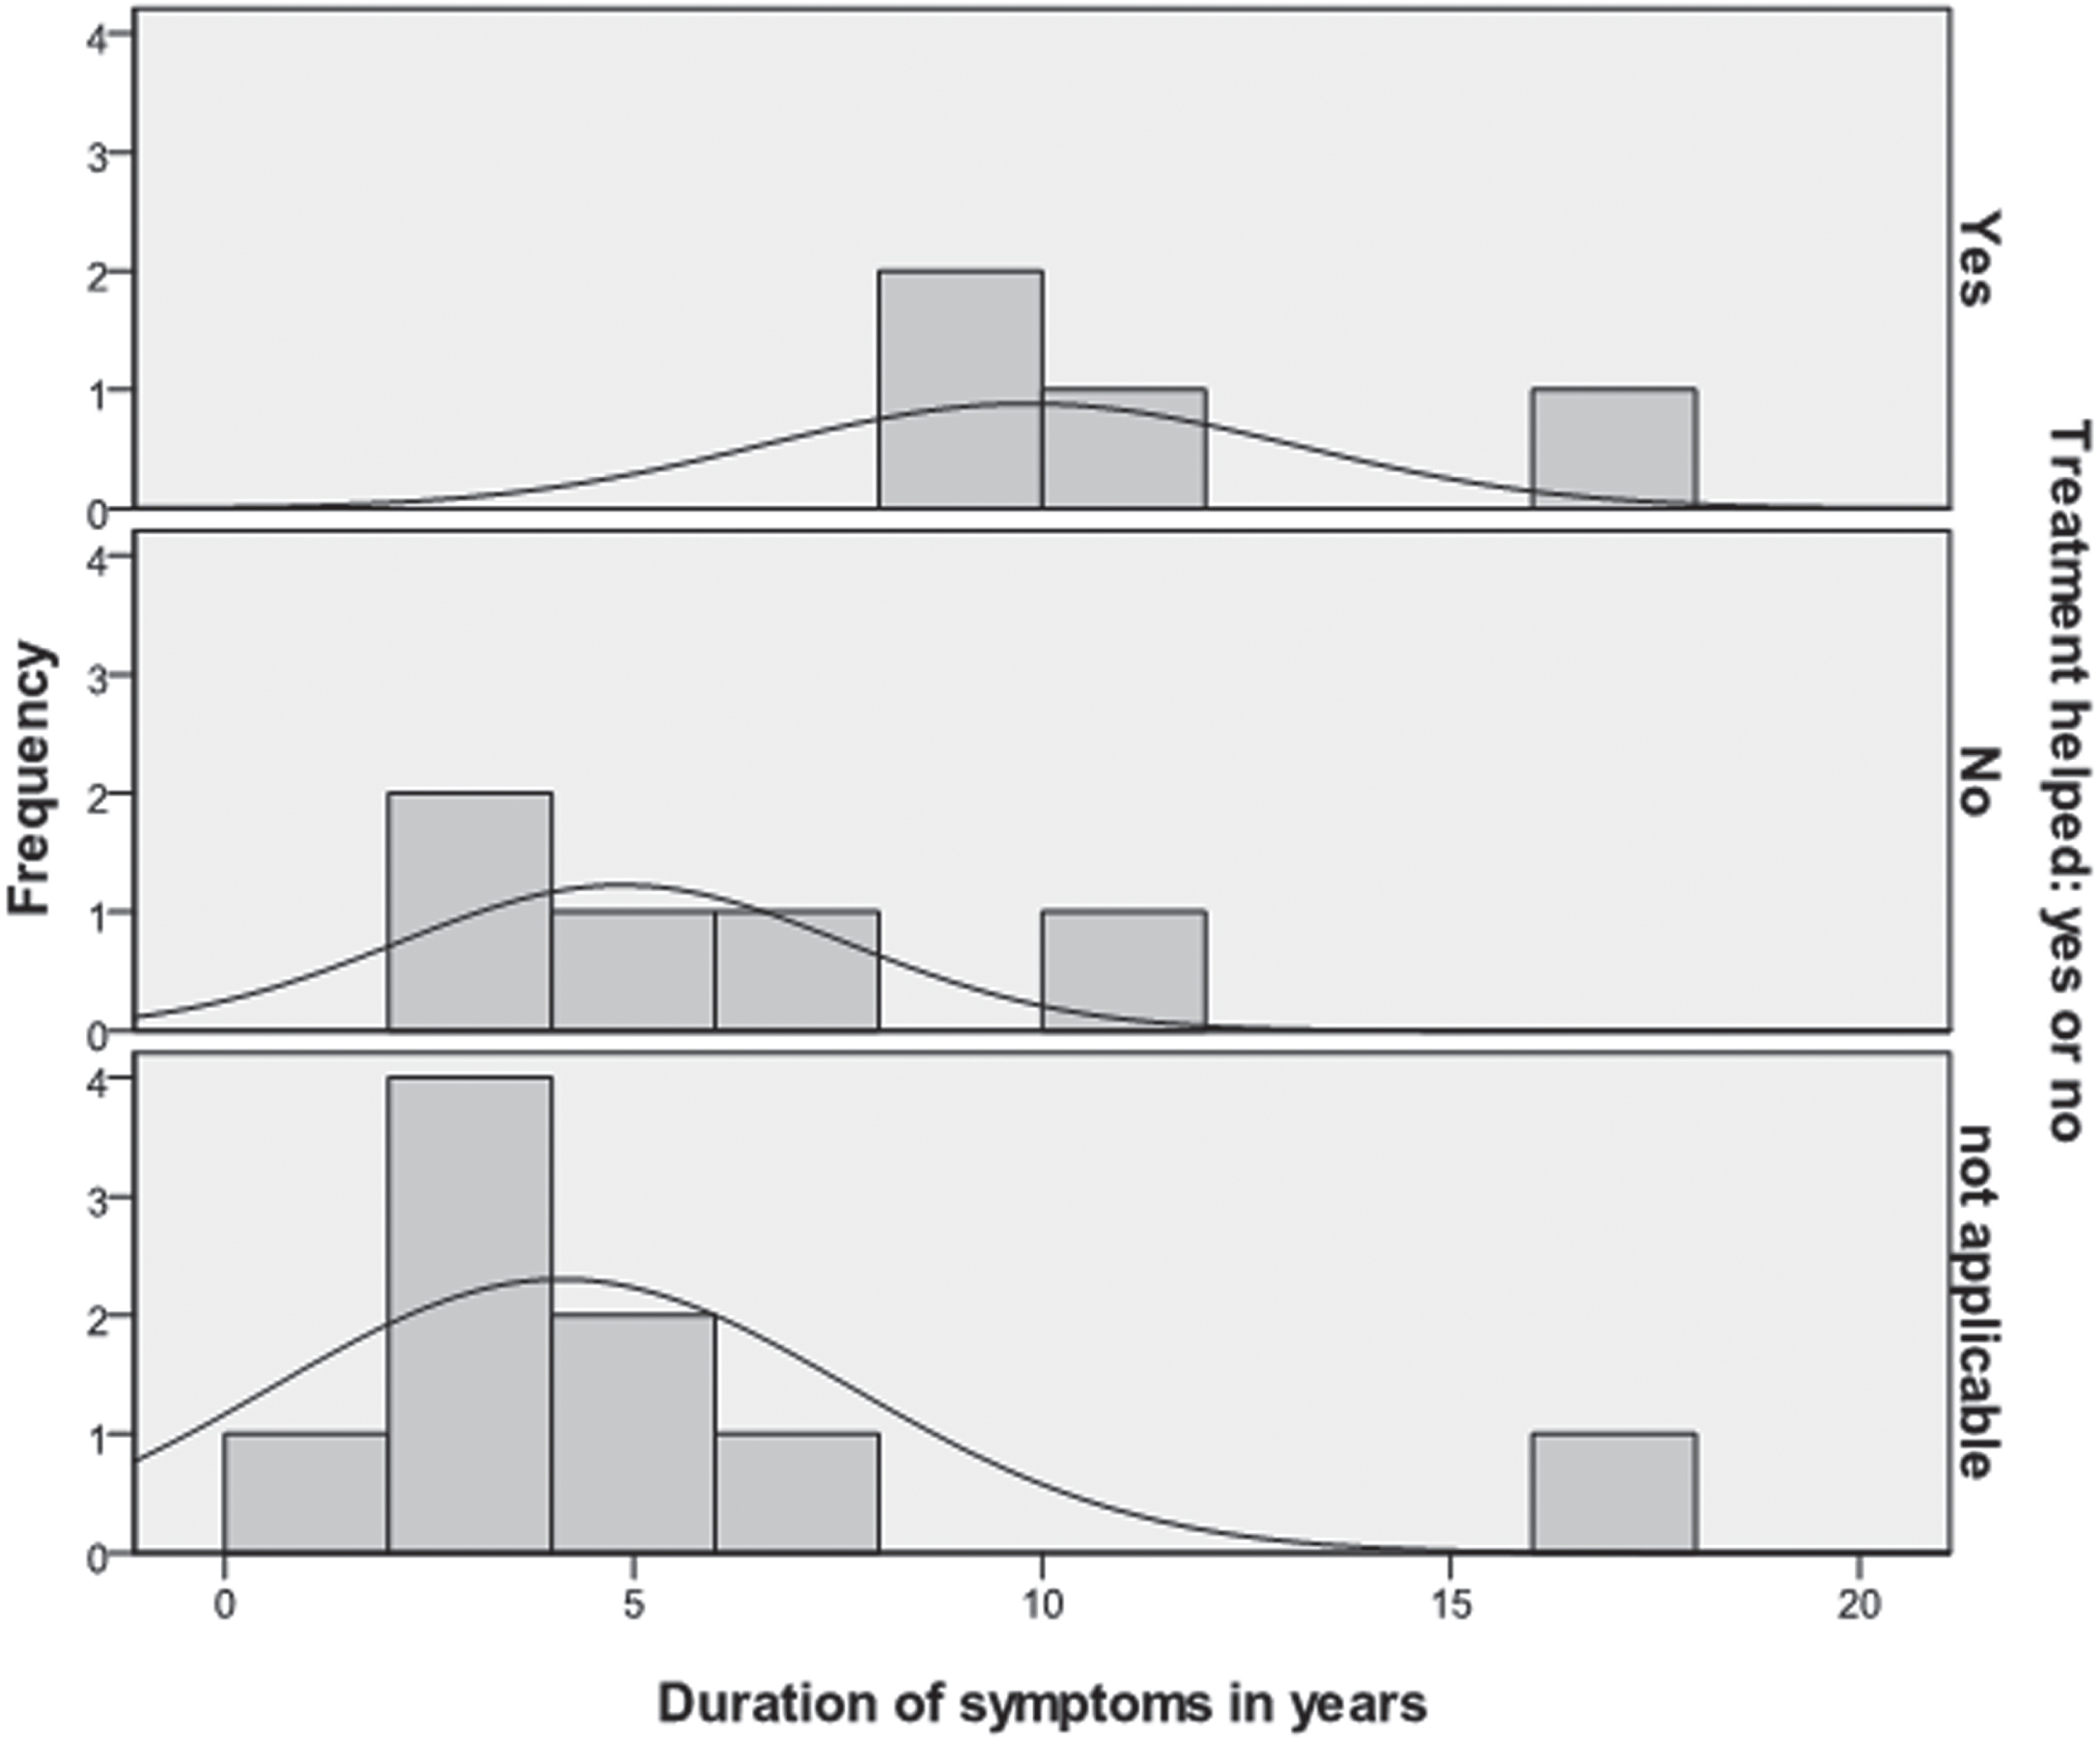 Histogram to show the relationship between the duration of symptoms and whether treatment helped.